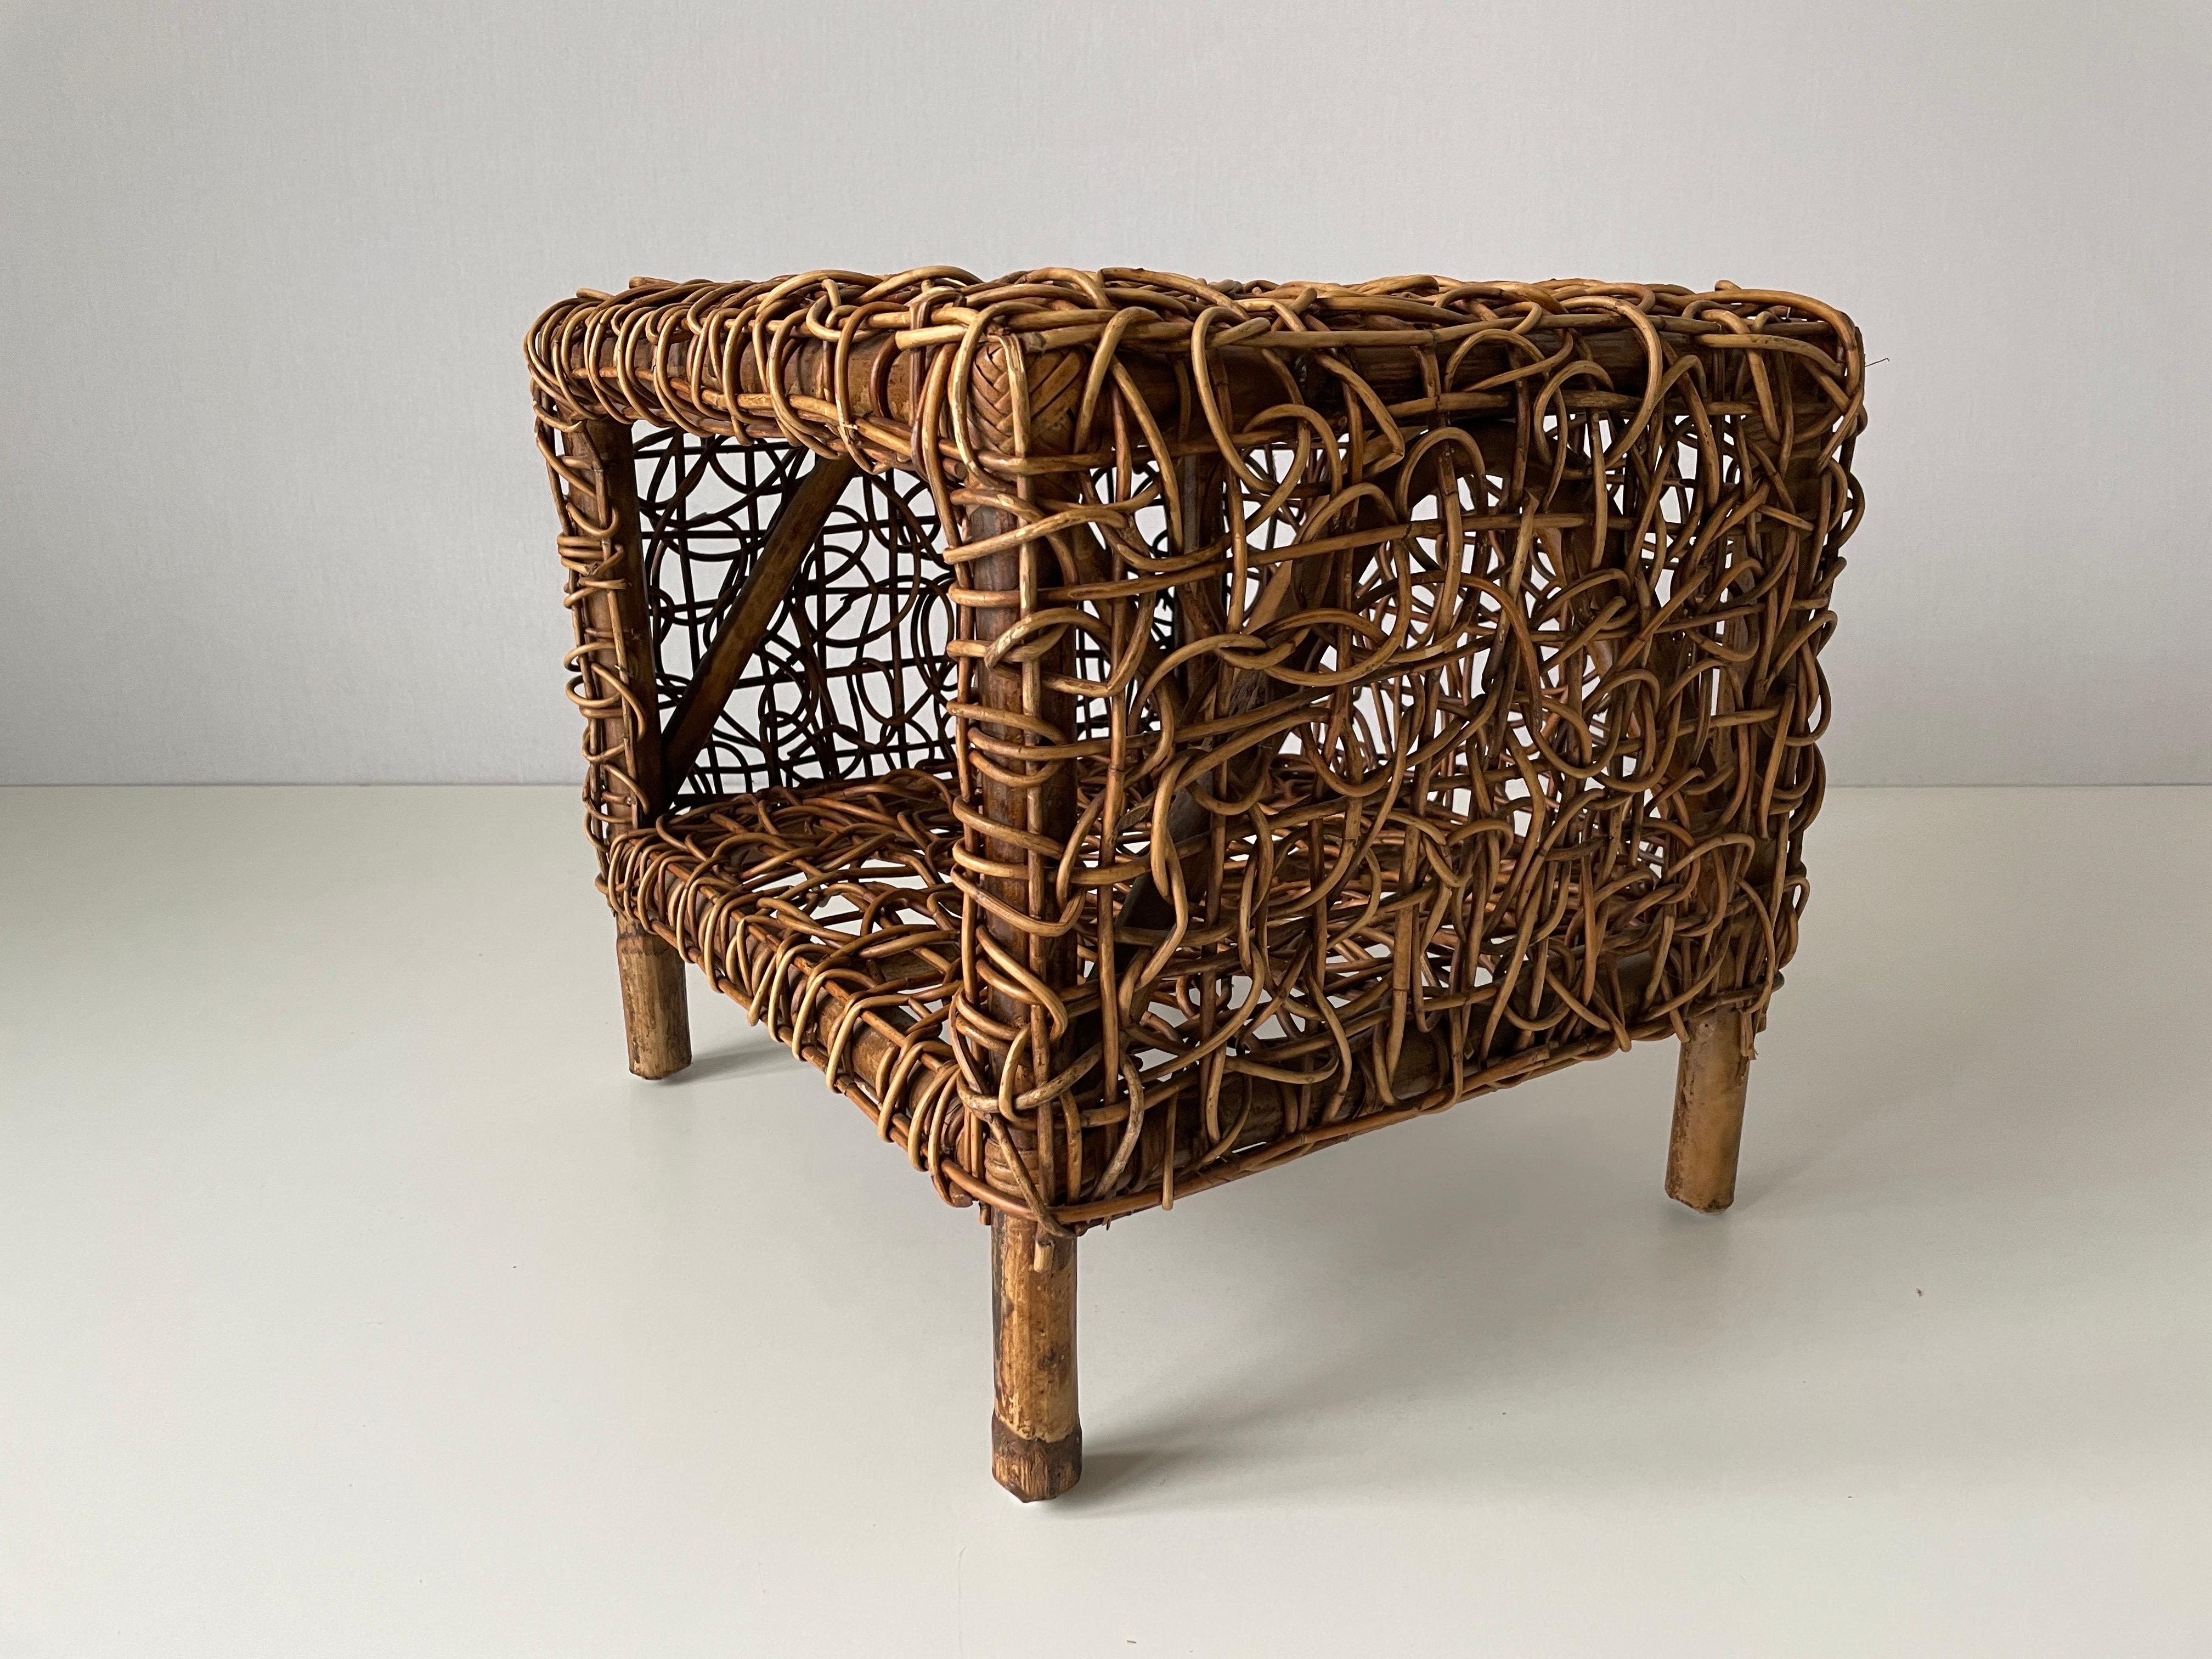 Unusual Design Woven Bamboo Pair of Bedside Tables, 1960s, Italy For Sale 4